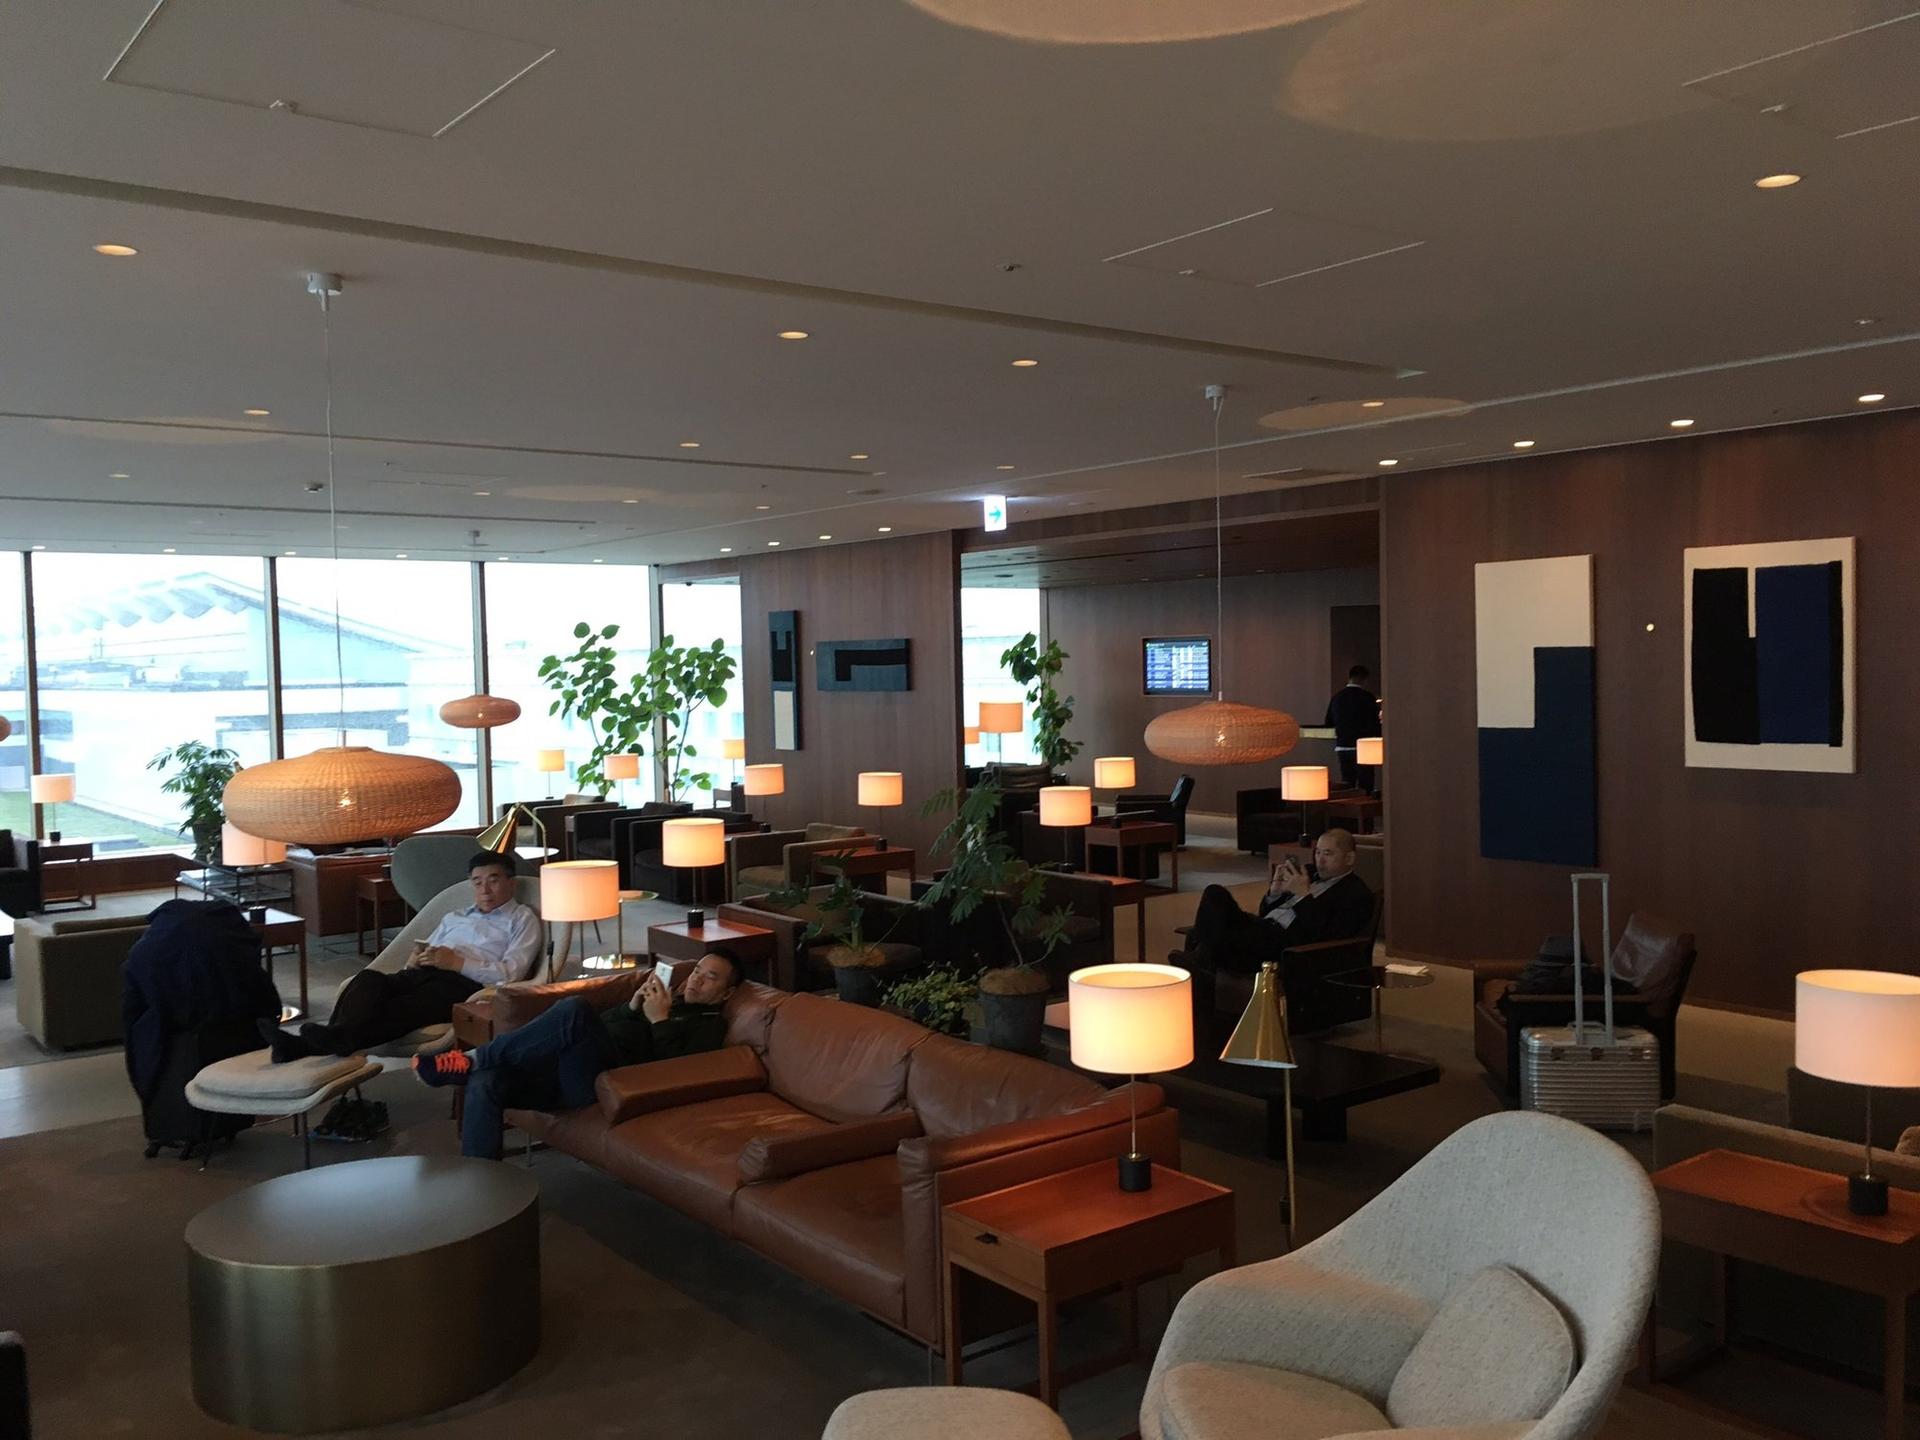 Cathay Pacific Lounge image 20 of 49